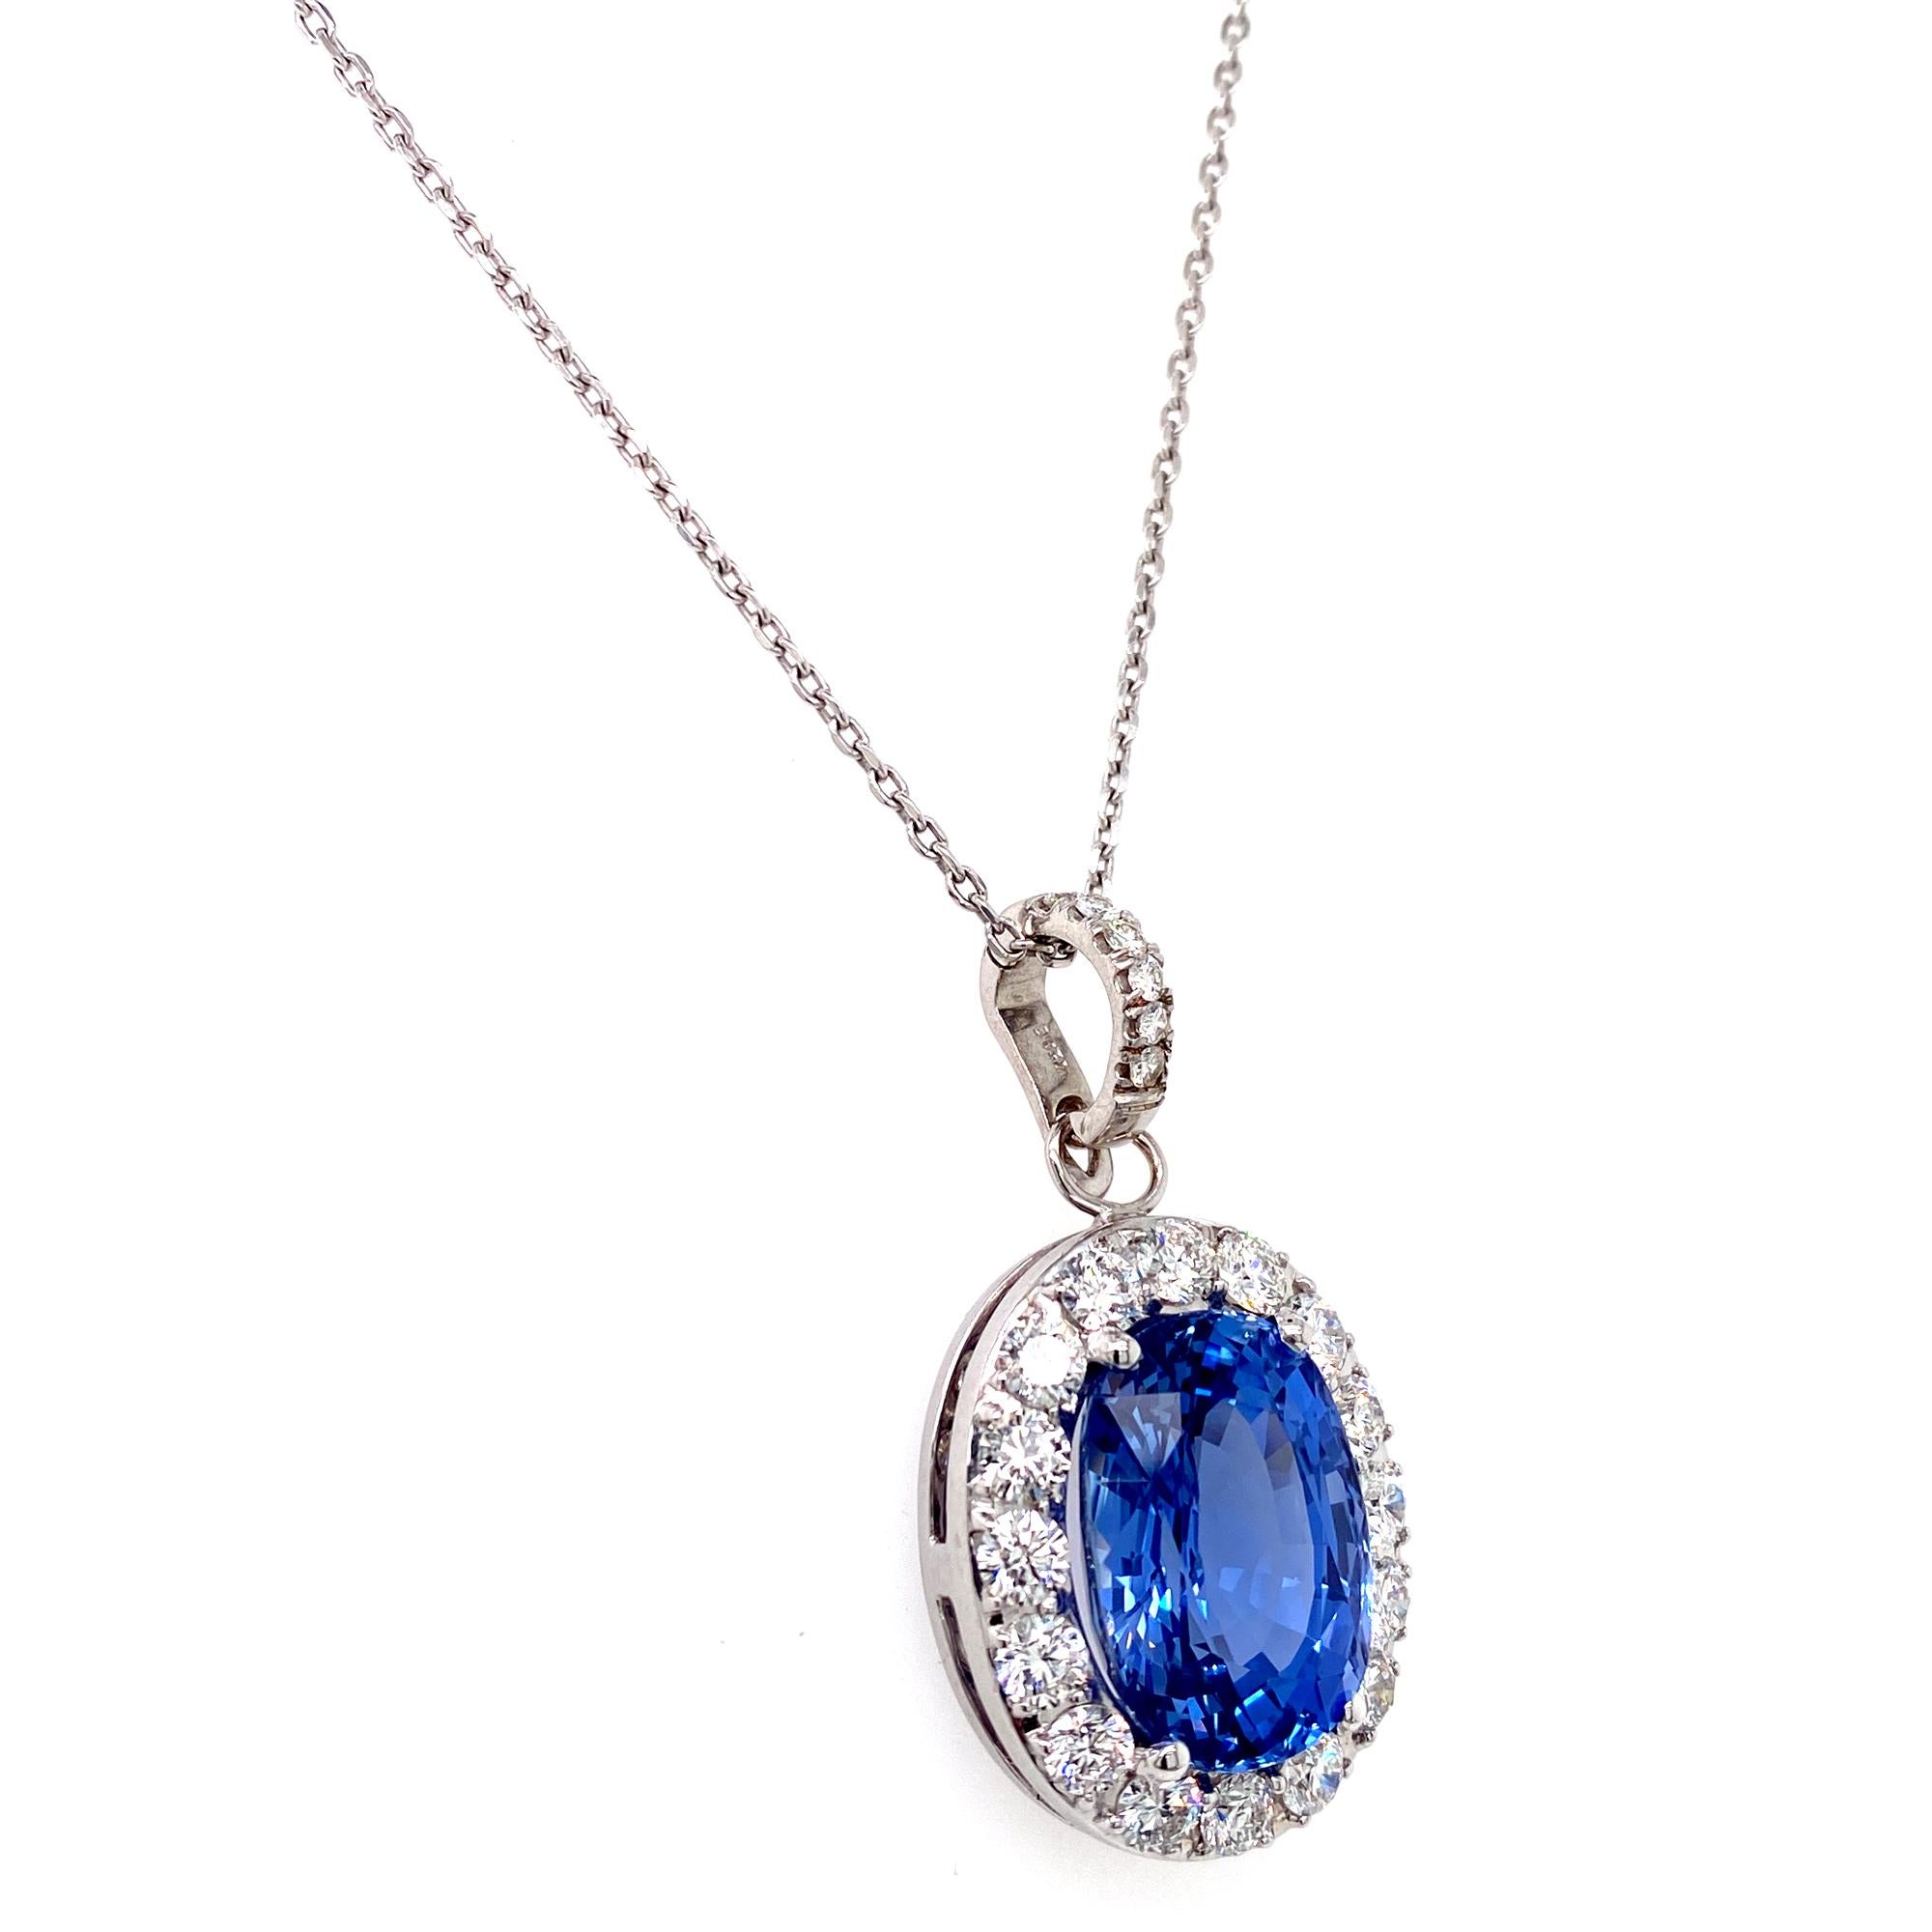 The most beautiful color Blue Sapphire and diamond pendant is fashioned in 18 karat white gold. The 14.48 carat oval no heat Ceylon blue sapphire is surrounded by round brilliant cut diamonds weighing 2.50 carat total weight. The diamonds are graded